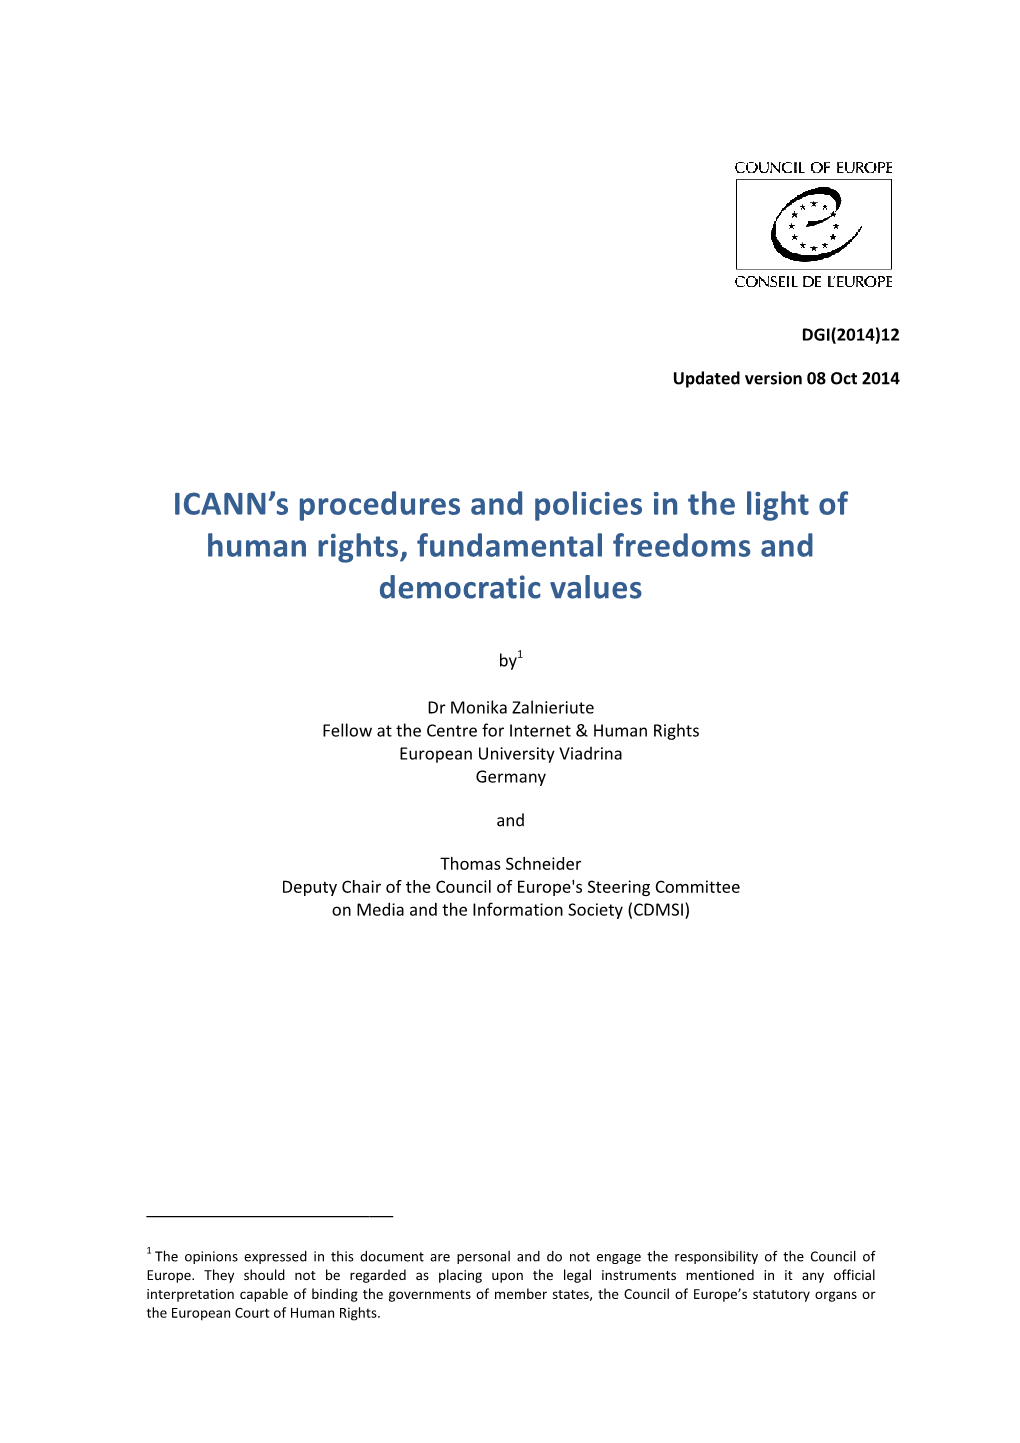 ICANN's Procedures and Policies in the Light of Human Rights, Fundamental